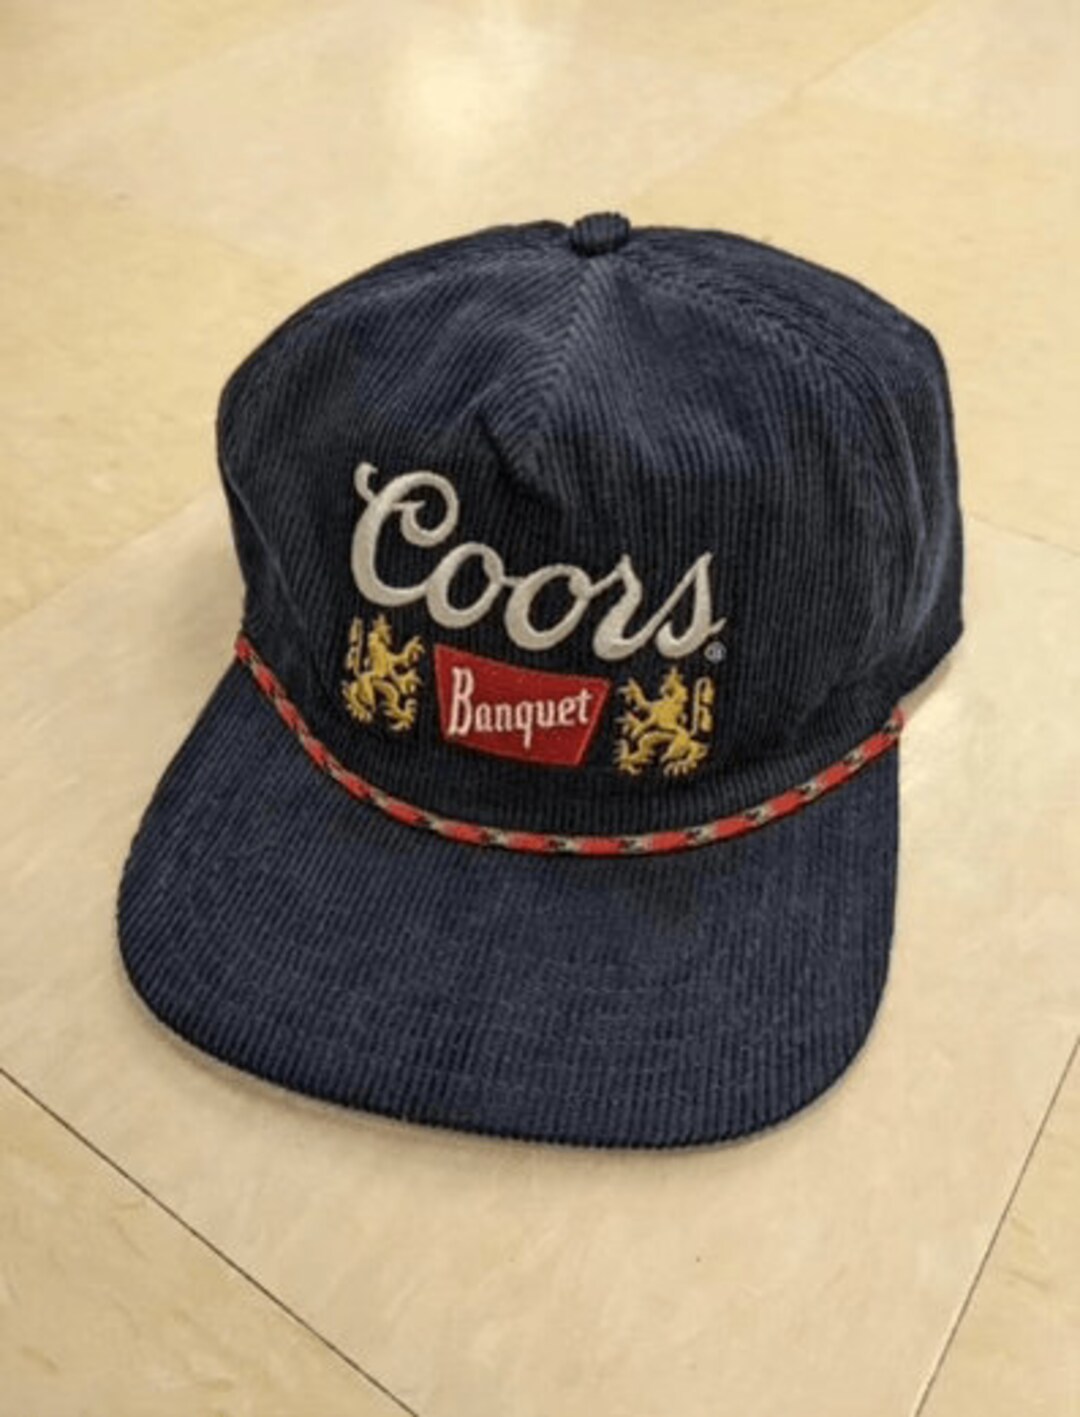 Coors Banquet Blue Corduroy Snapback With Red Rope Vintage Hat - Etsy